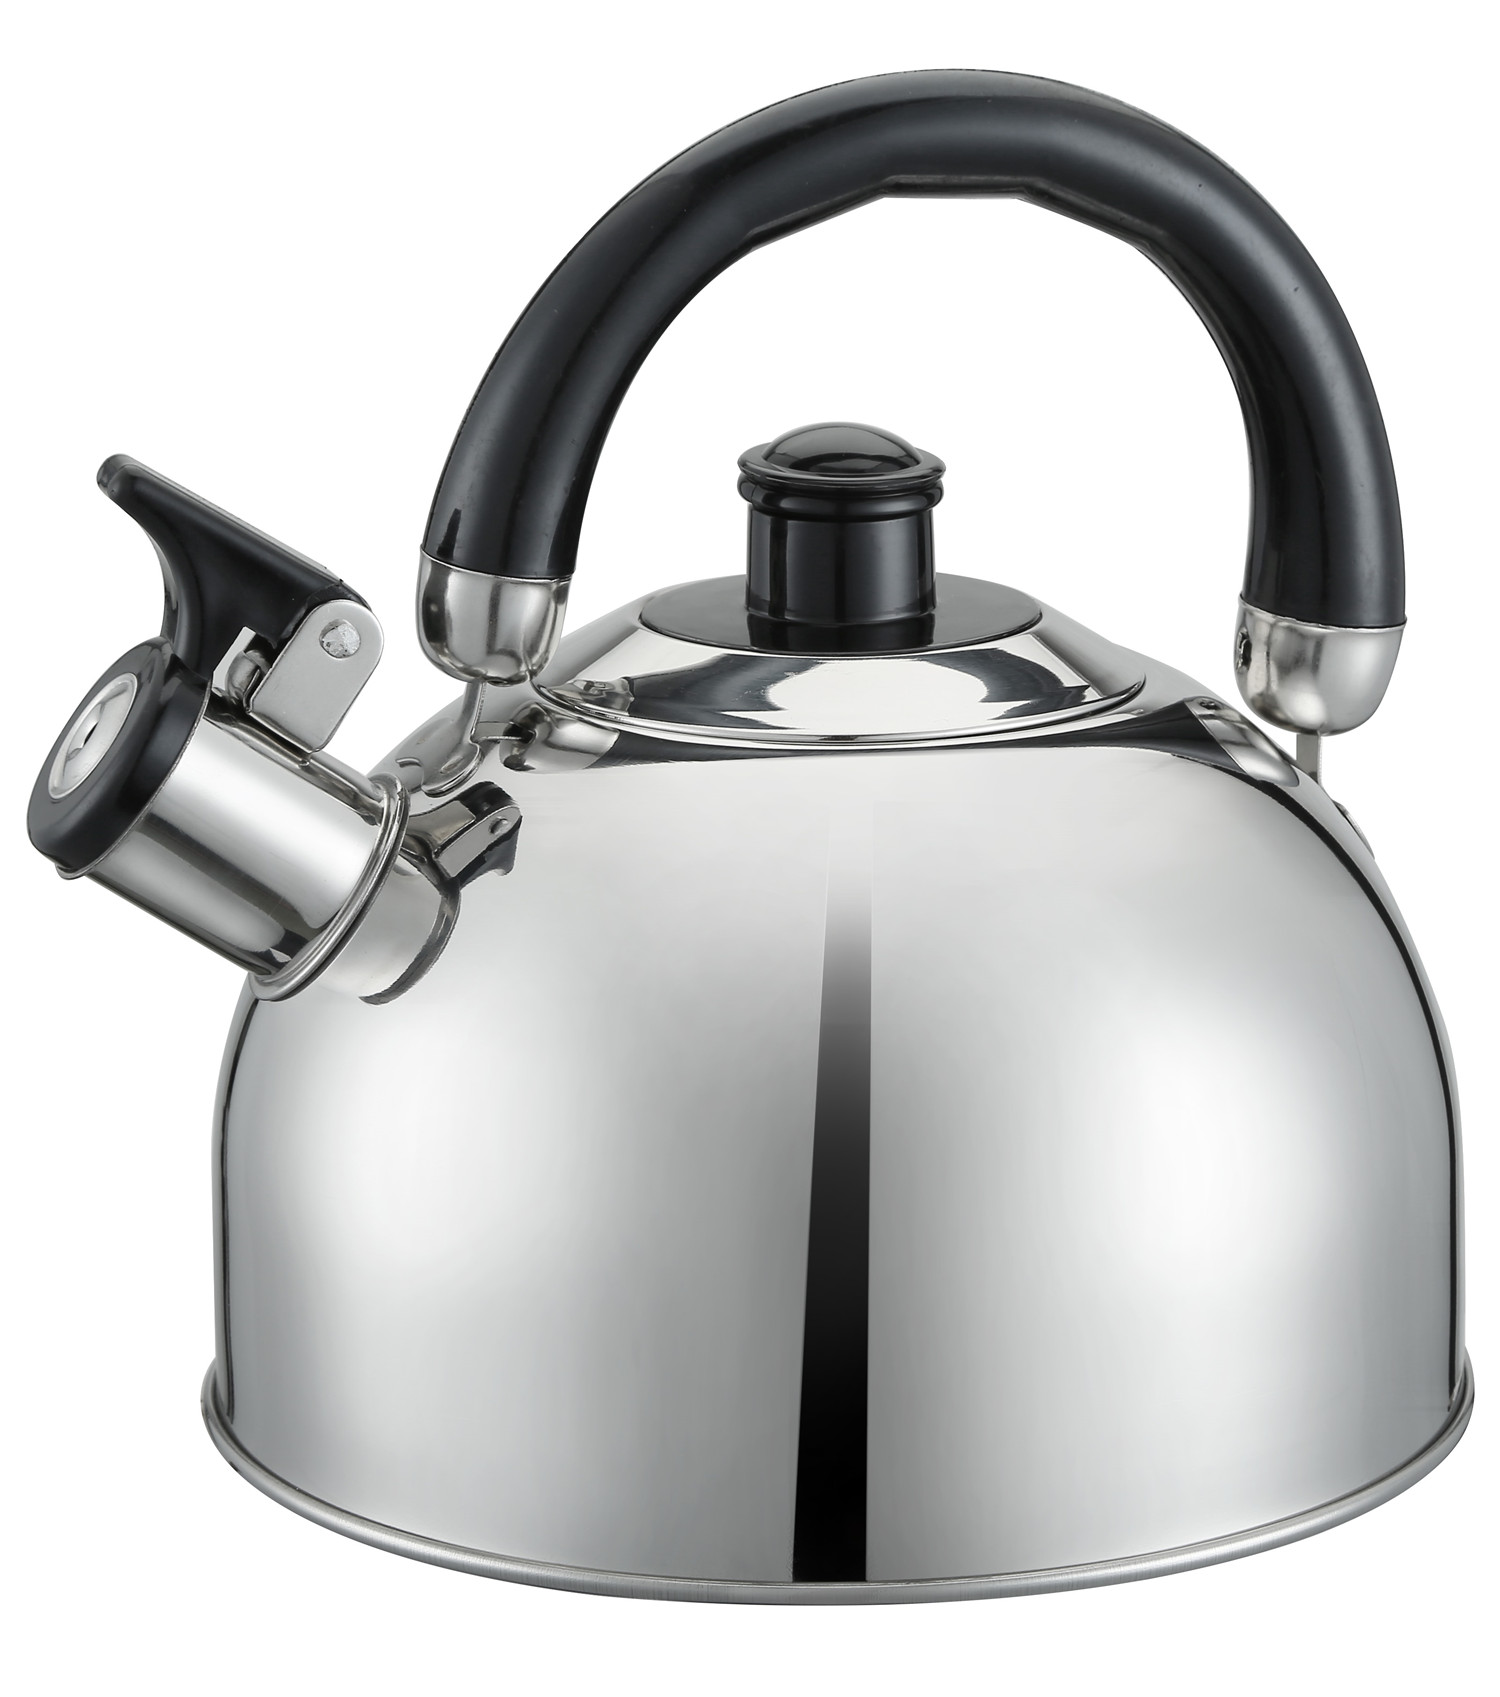 High Quality Stainless Steel Stovetop Whistling Tea Kettle Chaleira